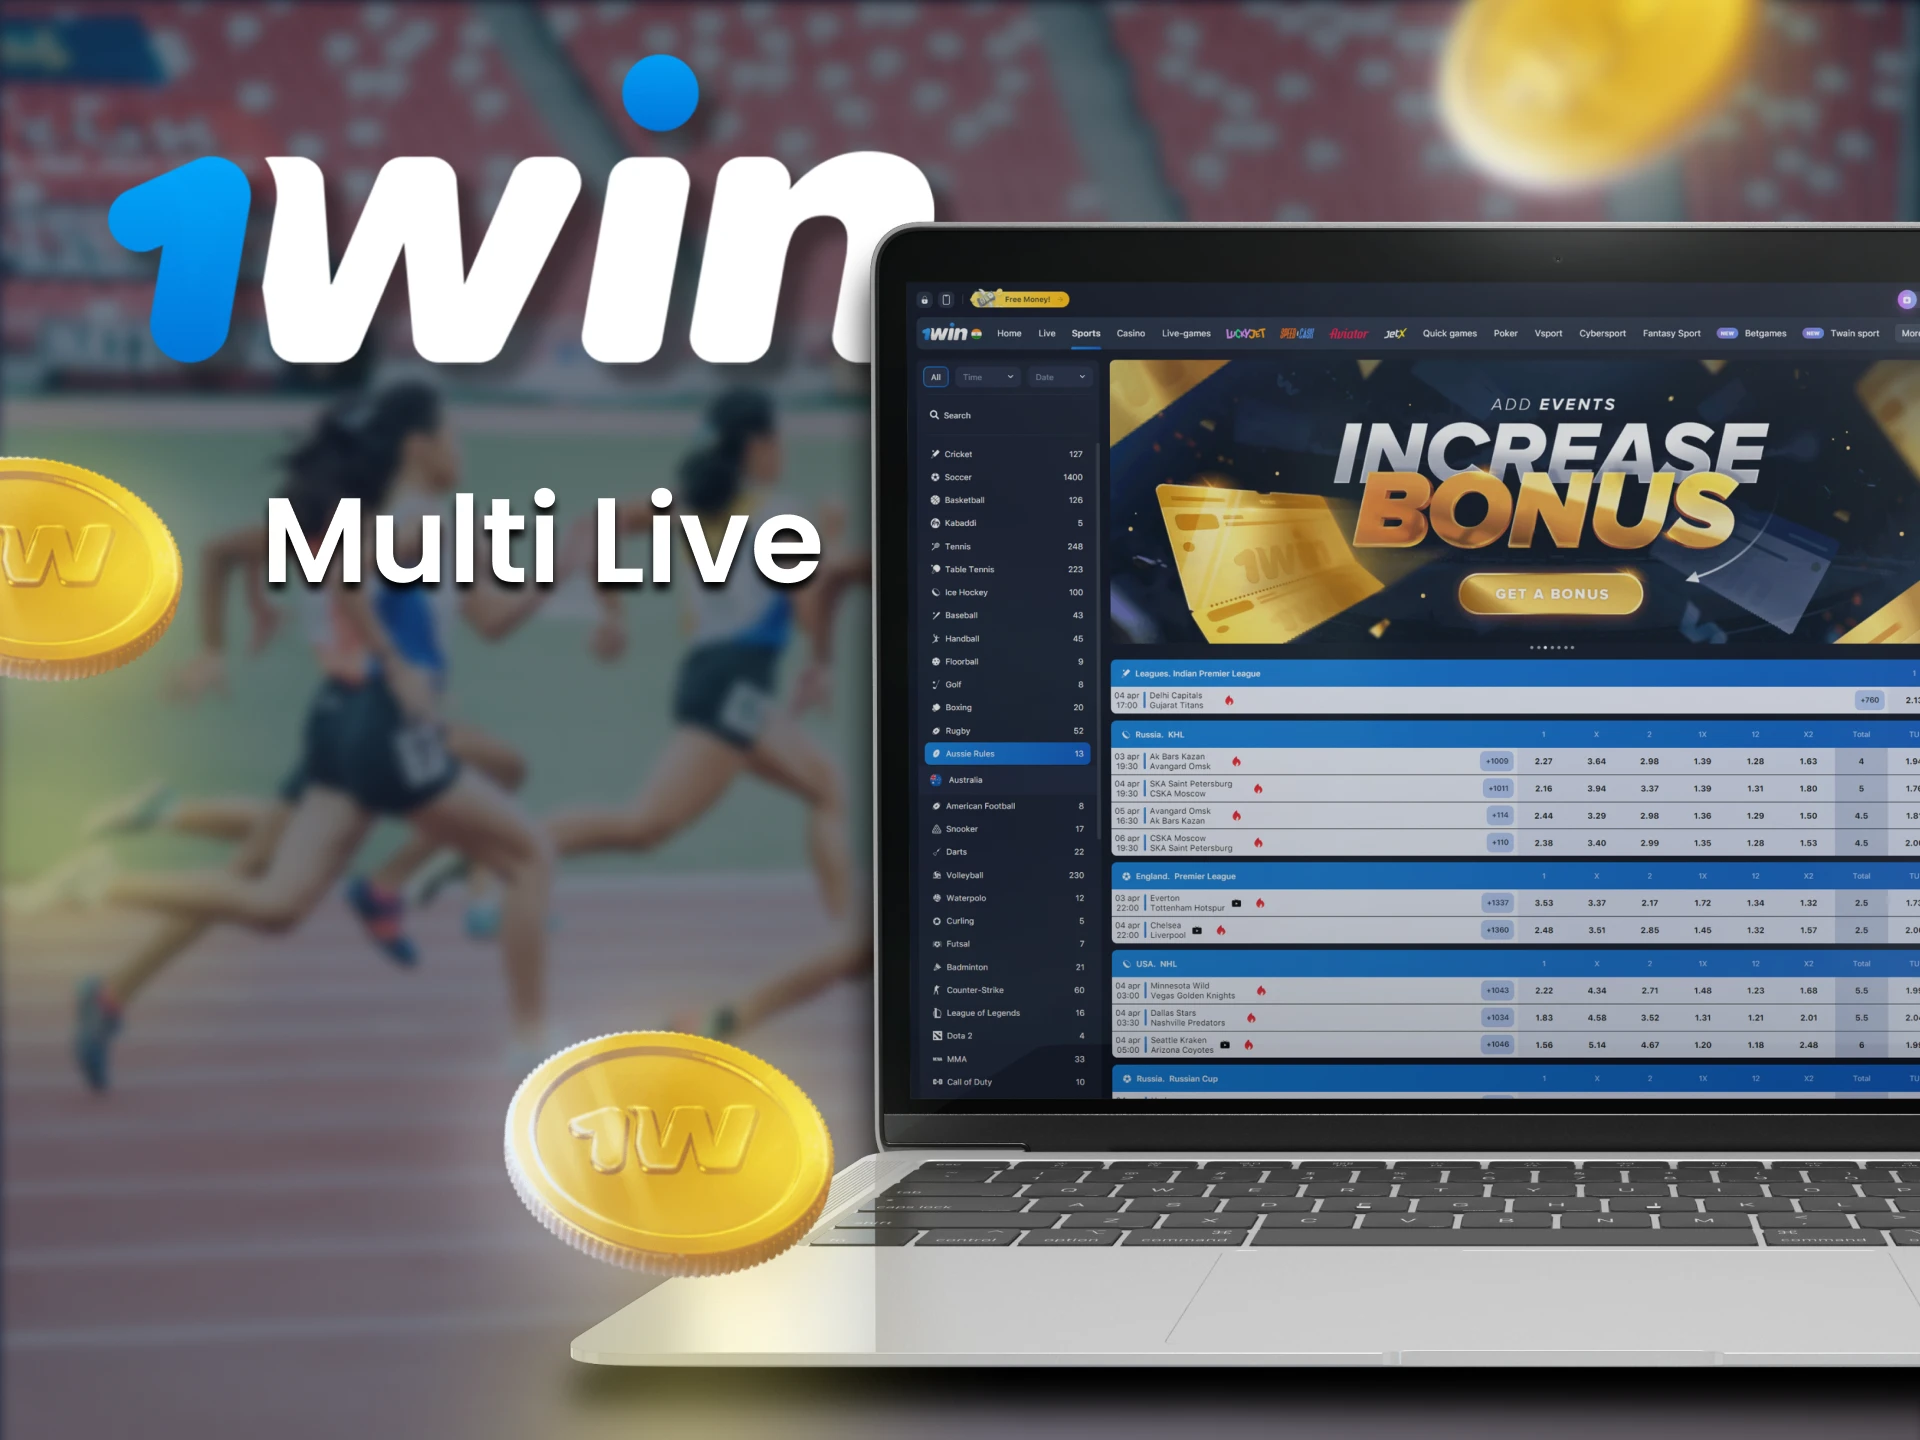 Place multi live bets at 1win.